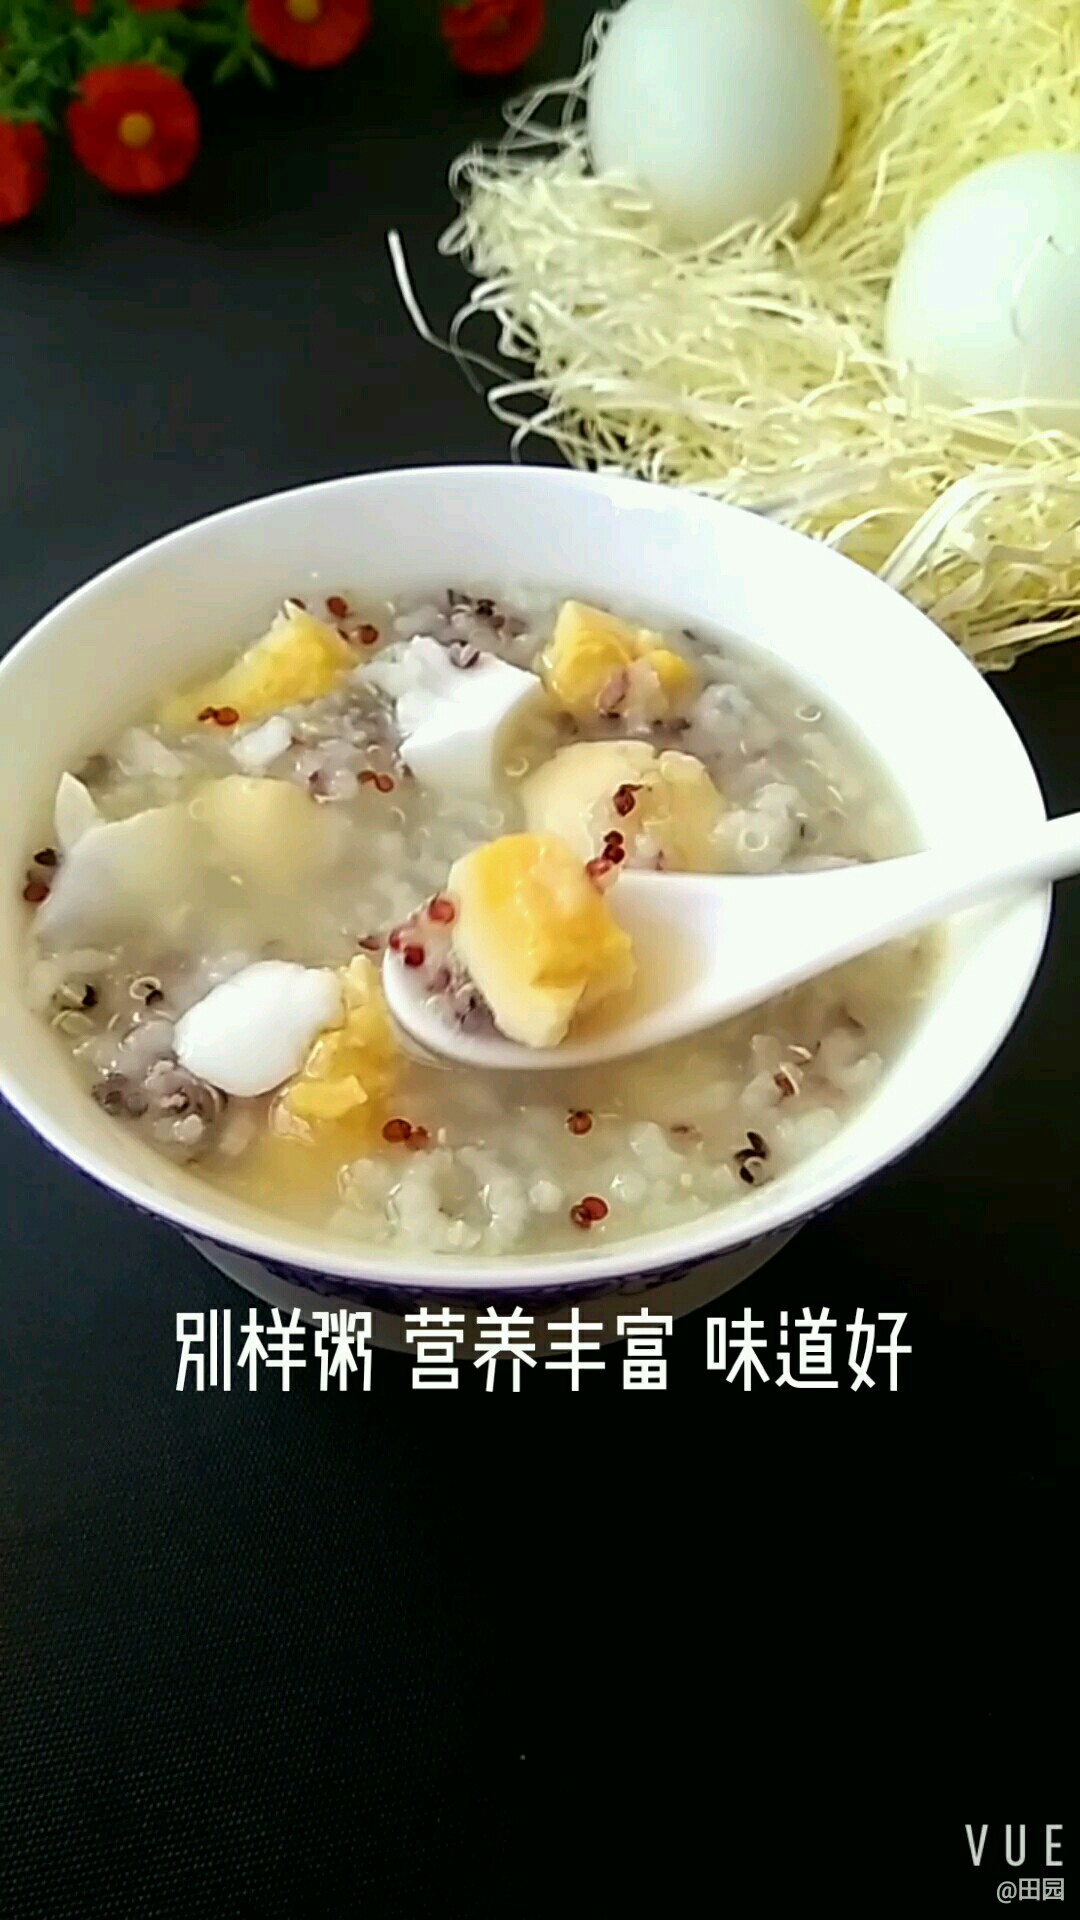 Different Kind of Porridge is Nutritious and Tastes Good